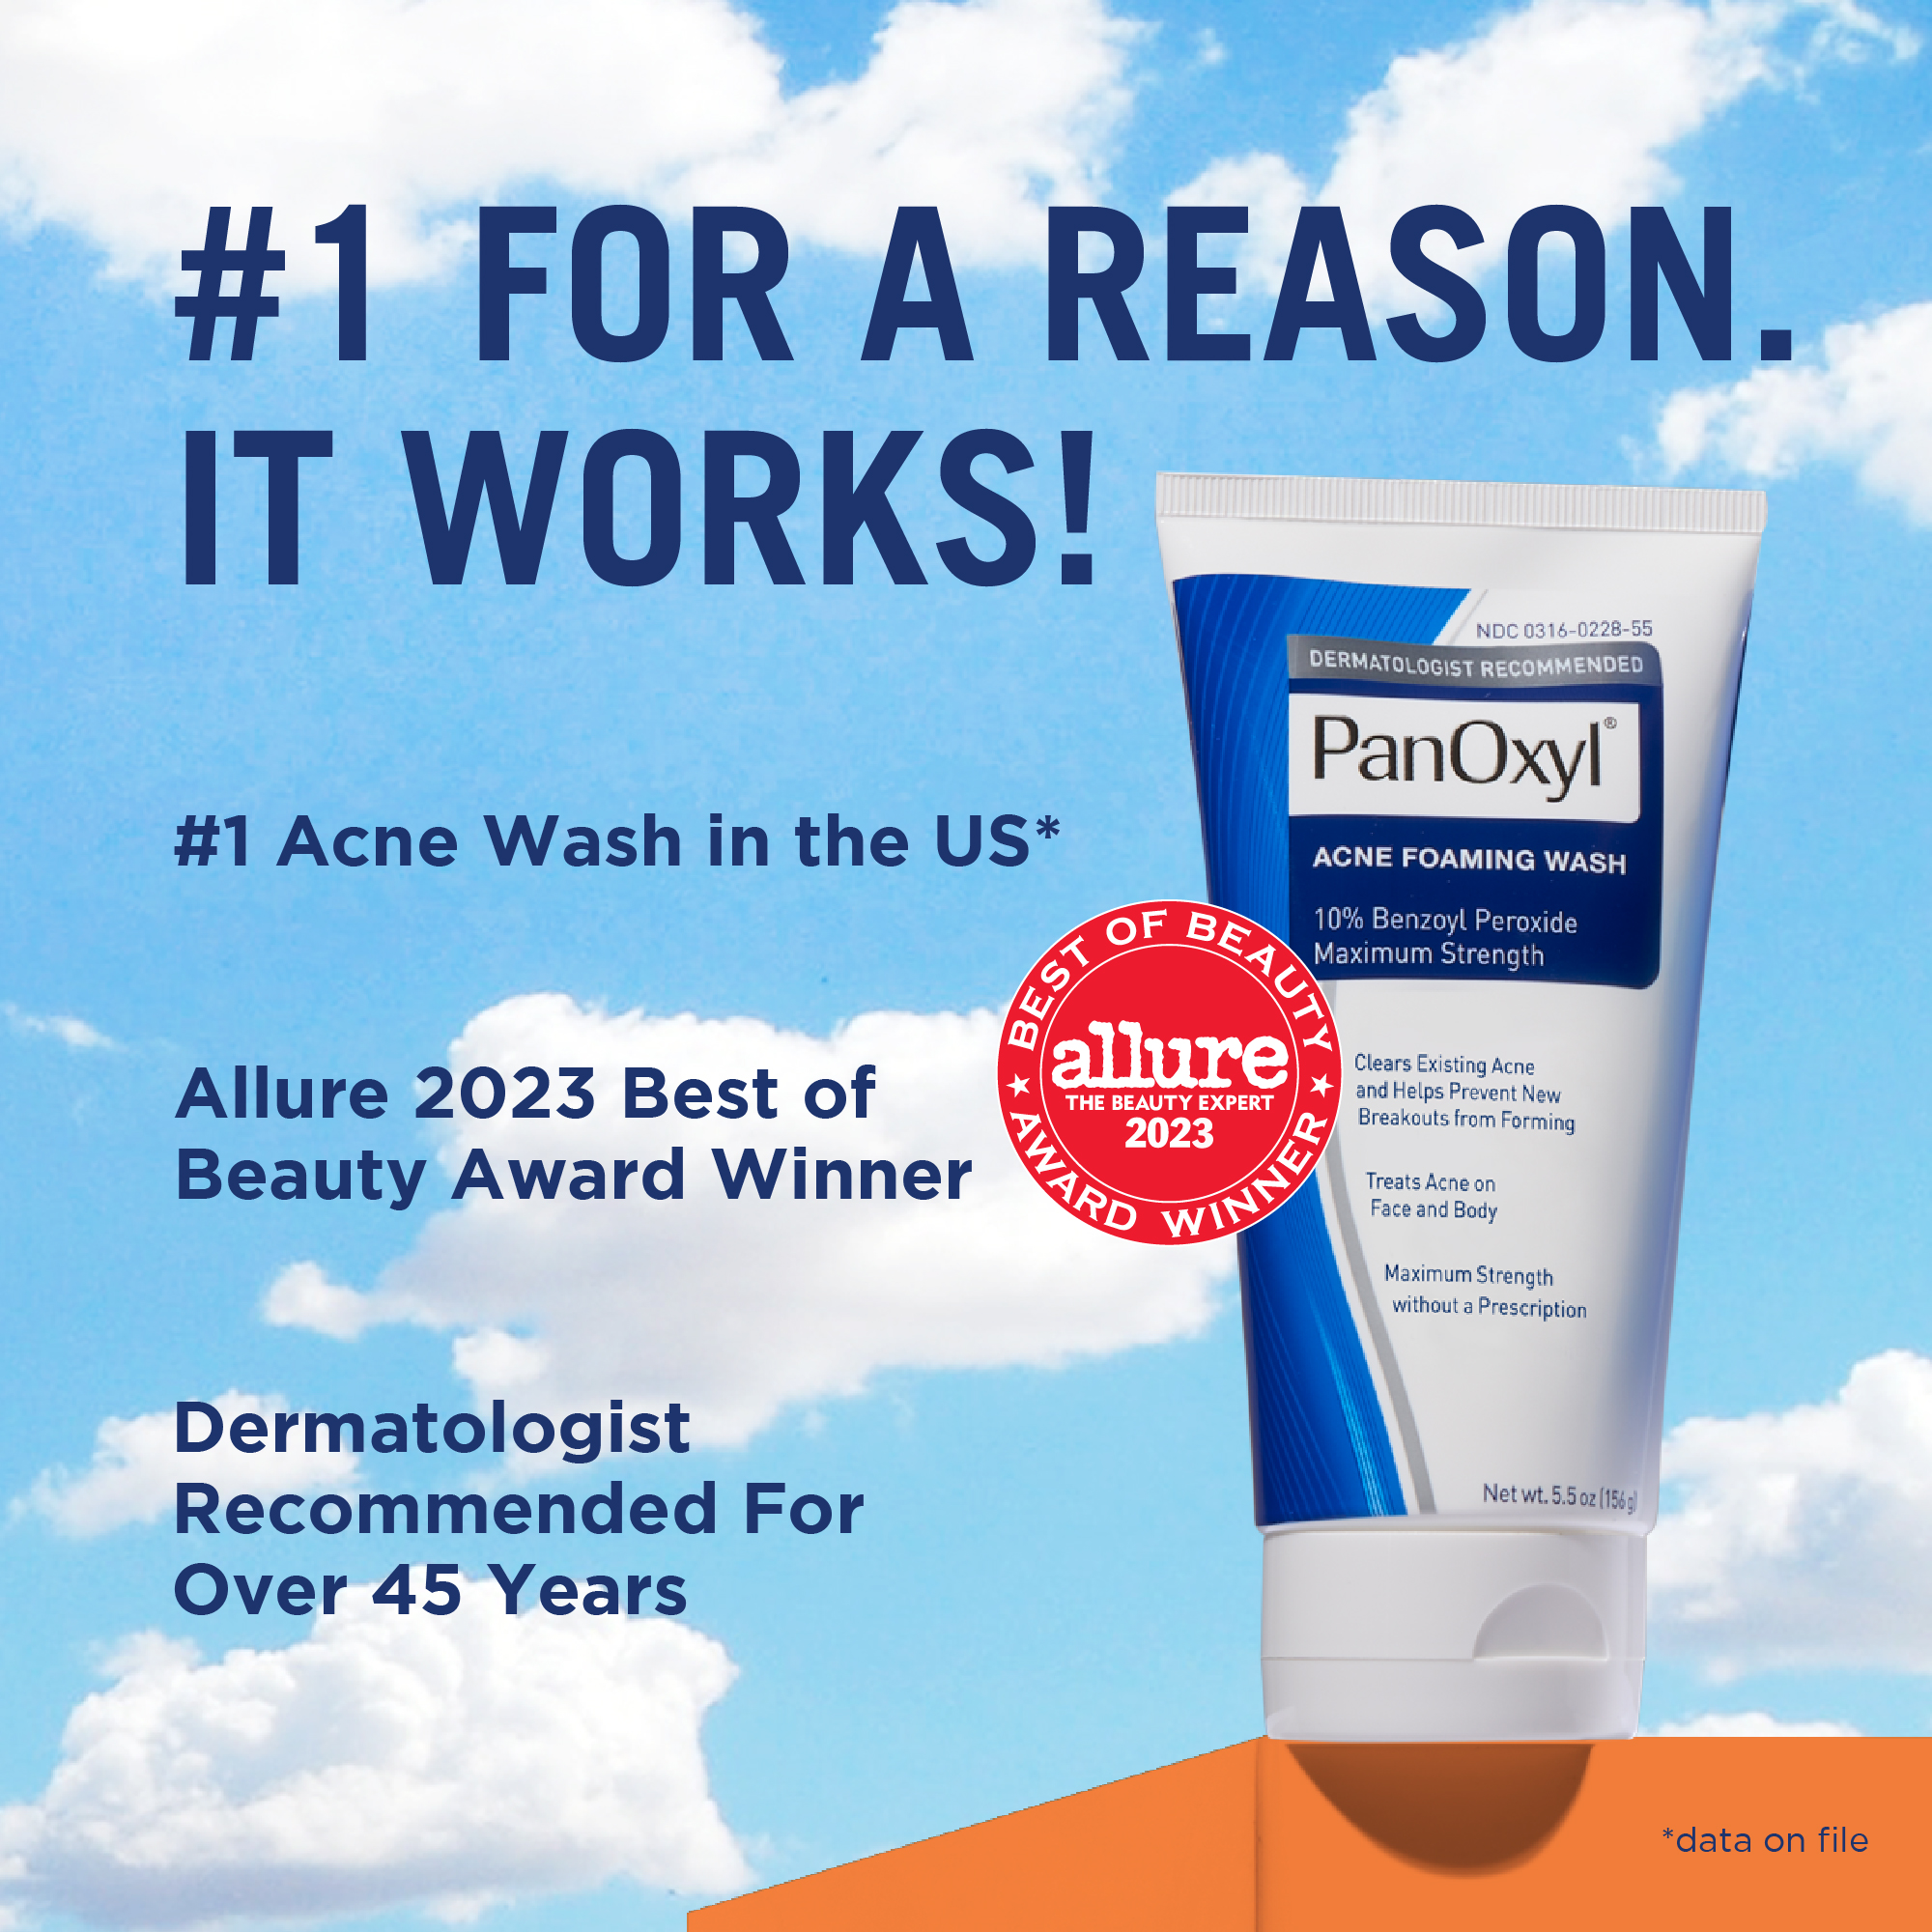 #1 for a reason. It works! #1 acne wash in the US (data on file). Allure 2023 Best of Beauty Award winner. Dermatologist recommended for over 45 years.